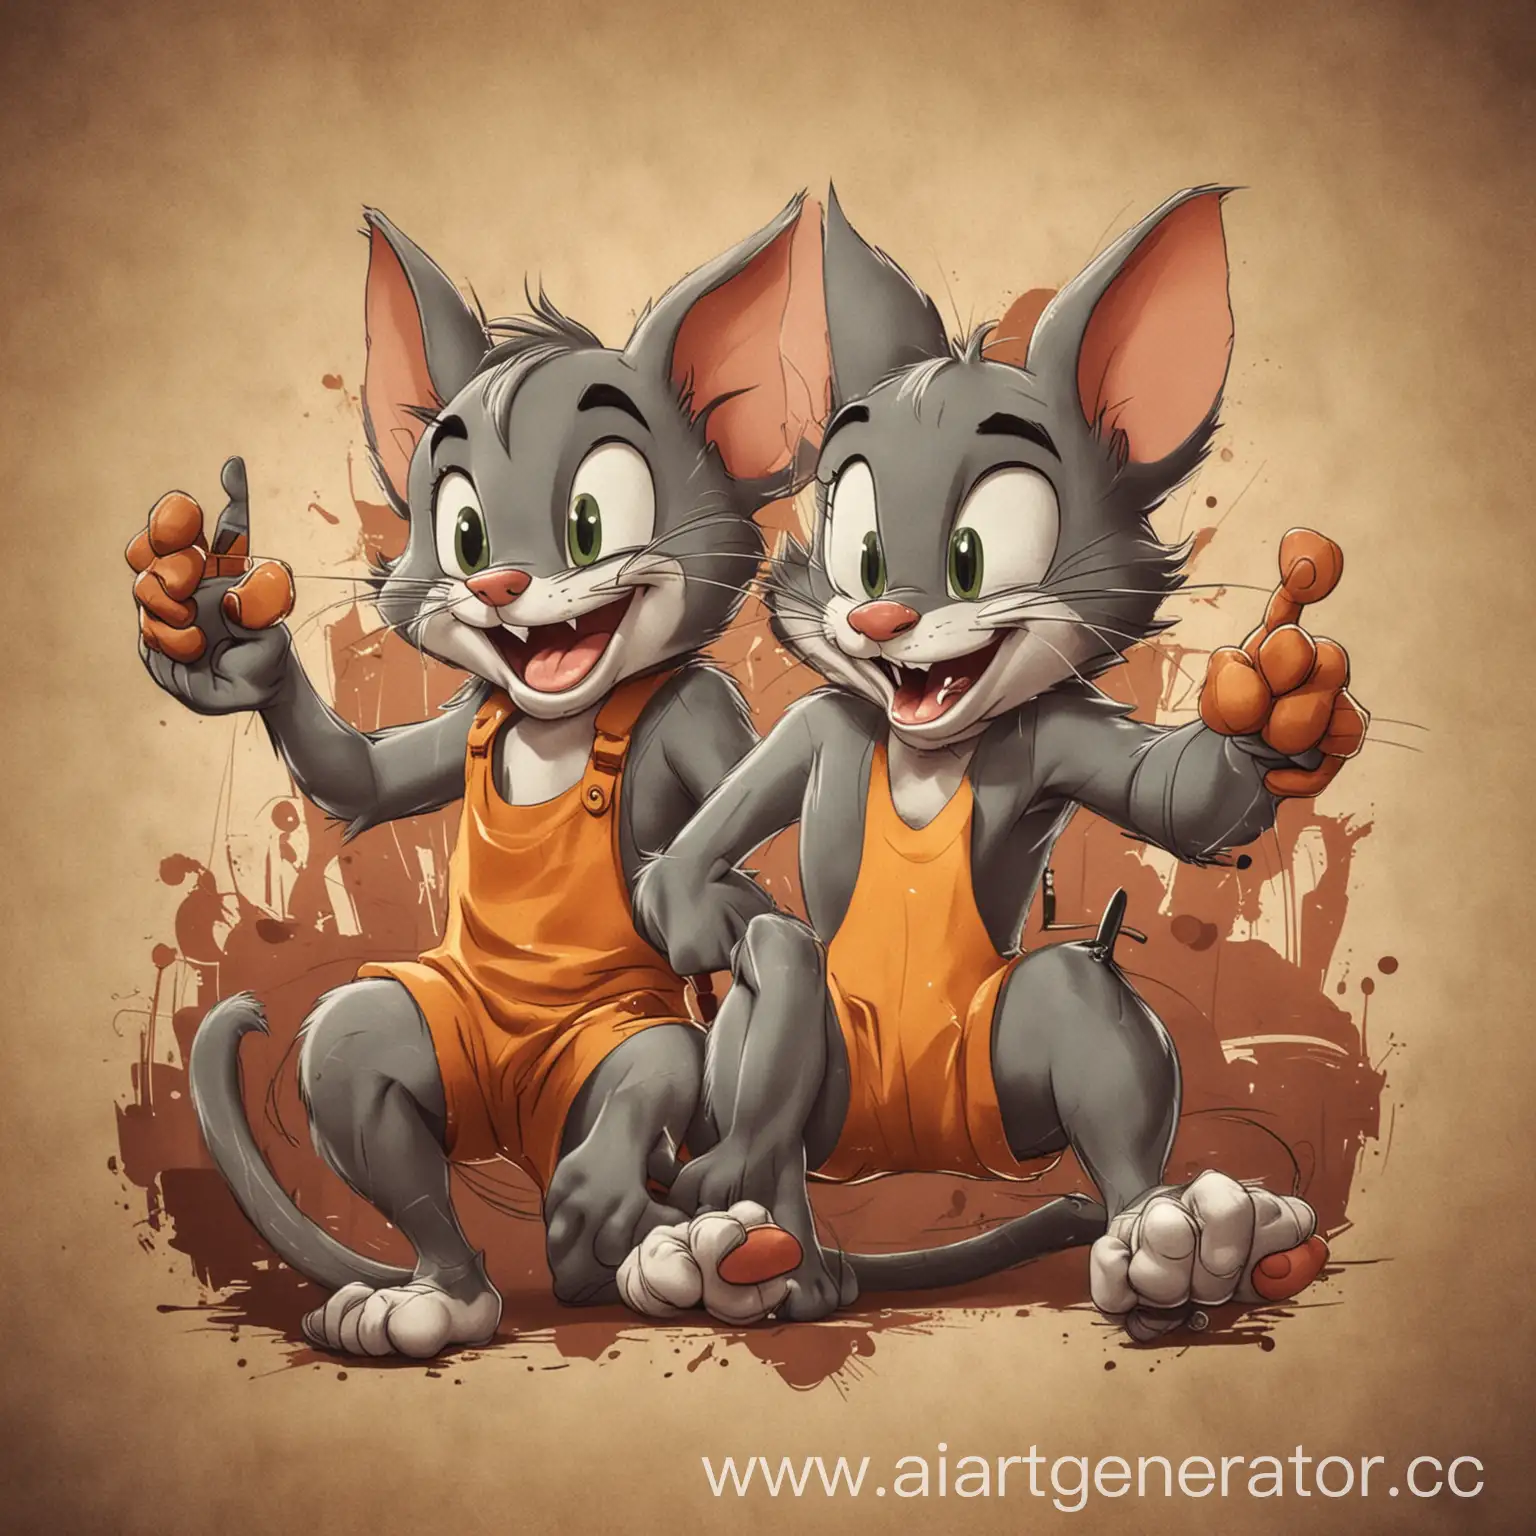 Classic-Cartoon-Chase-Scene-Tom-and-Jerry-Style